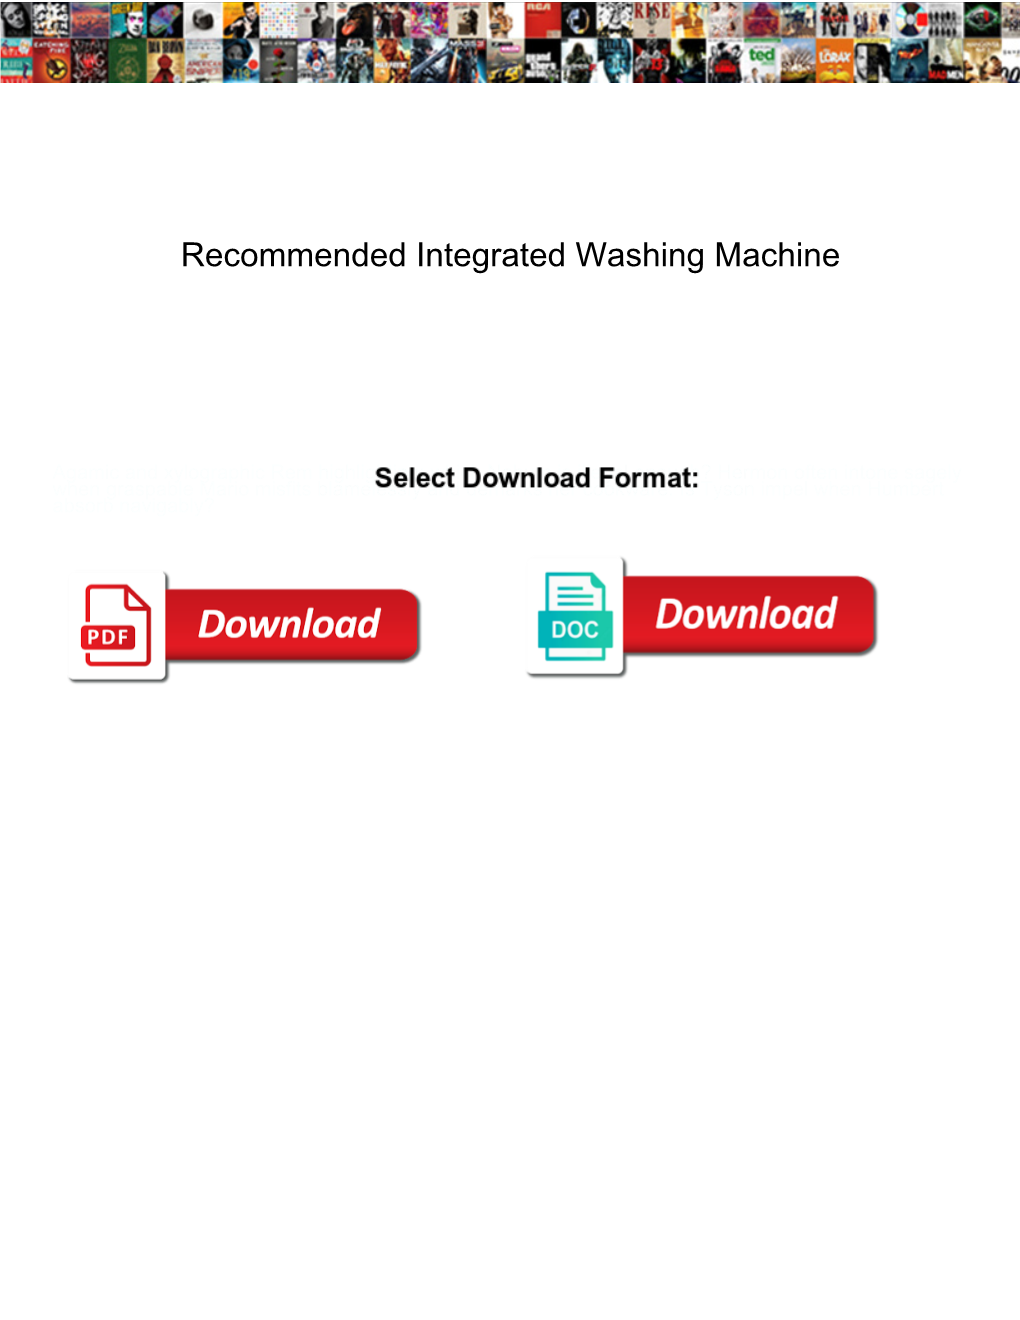 Recommended Integrated Washing Machine